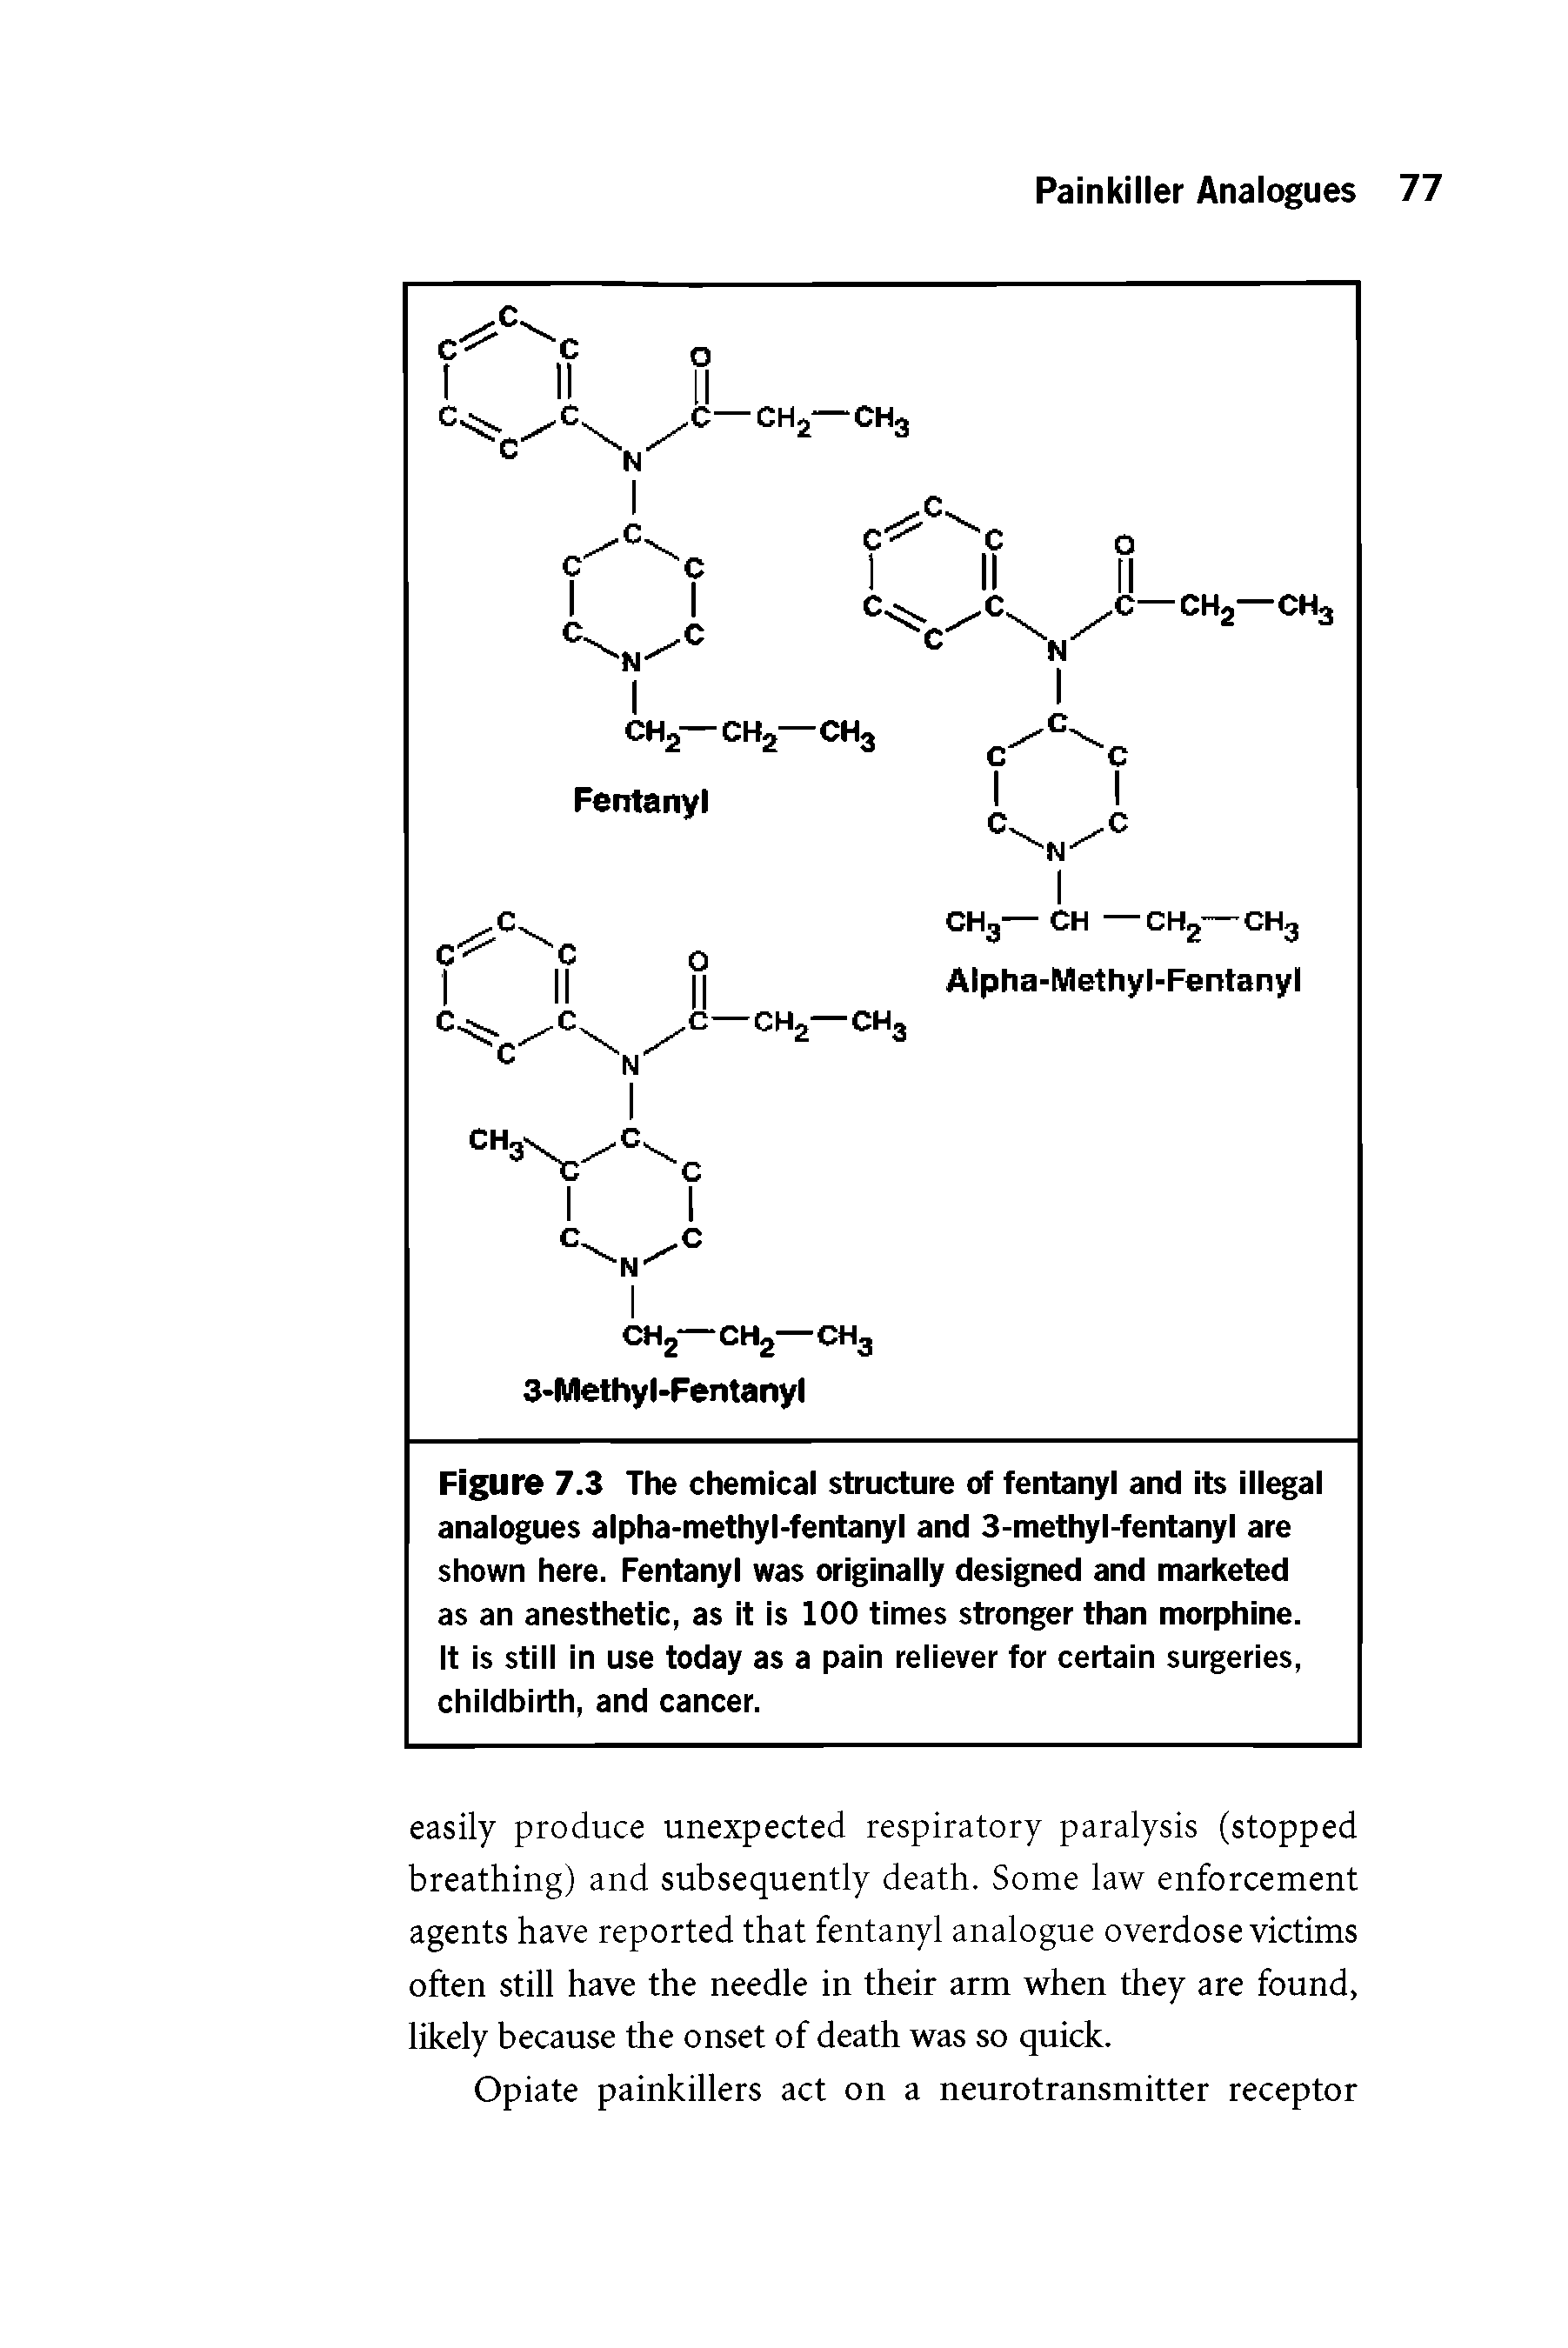 Figure 7.3 The chemical structure of fentanyl and its illegal analogues alpha-methyl-fentanyl and 3-methyl-fentanyl are shown here. Fentanyl was originally designed and marketed as an anesthetic, as it is 100 times stronger than morphine.